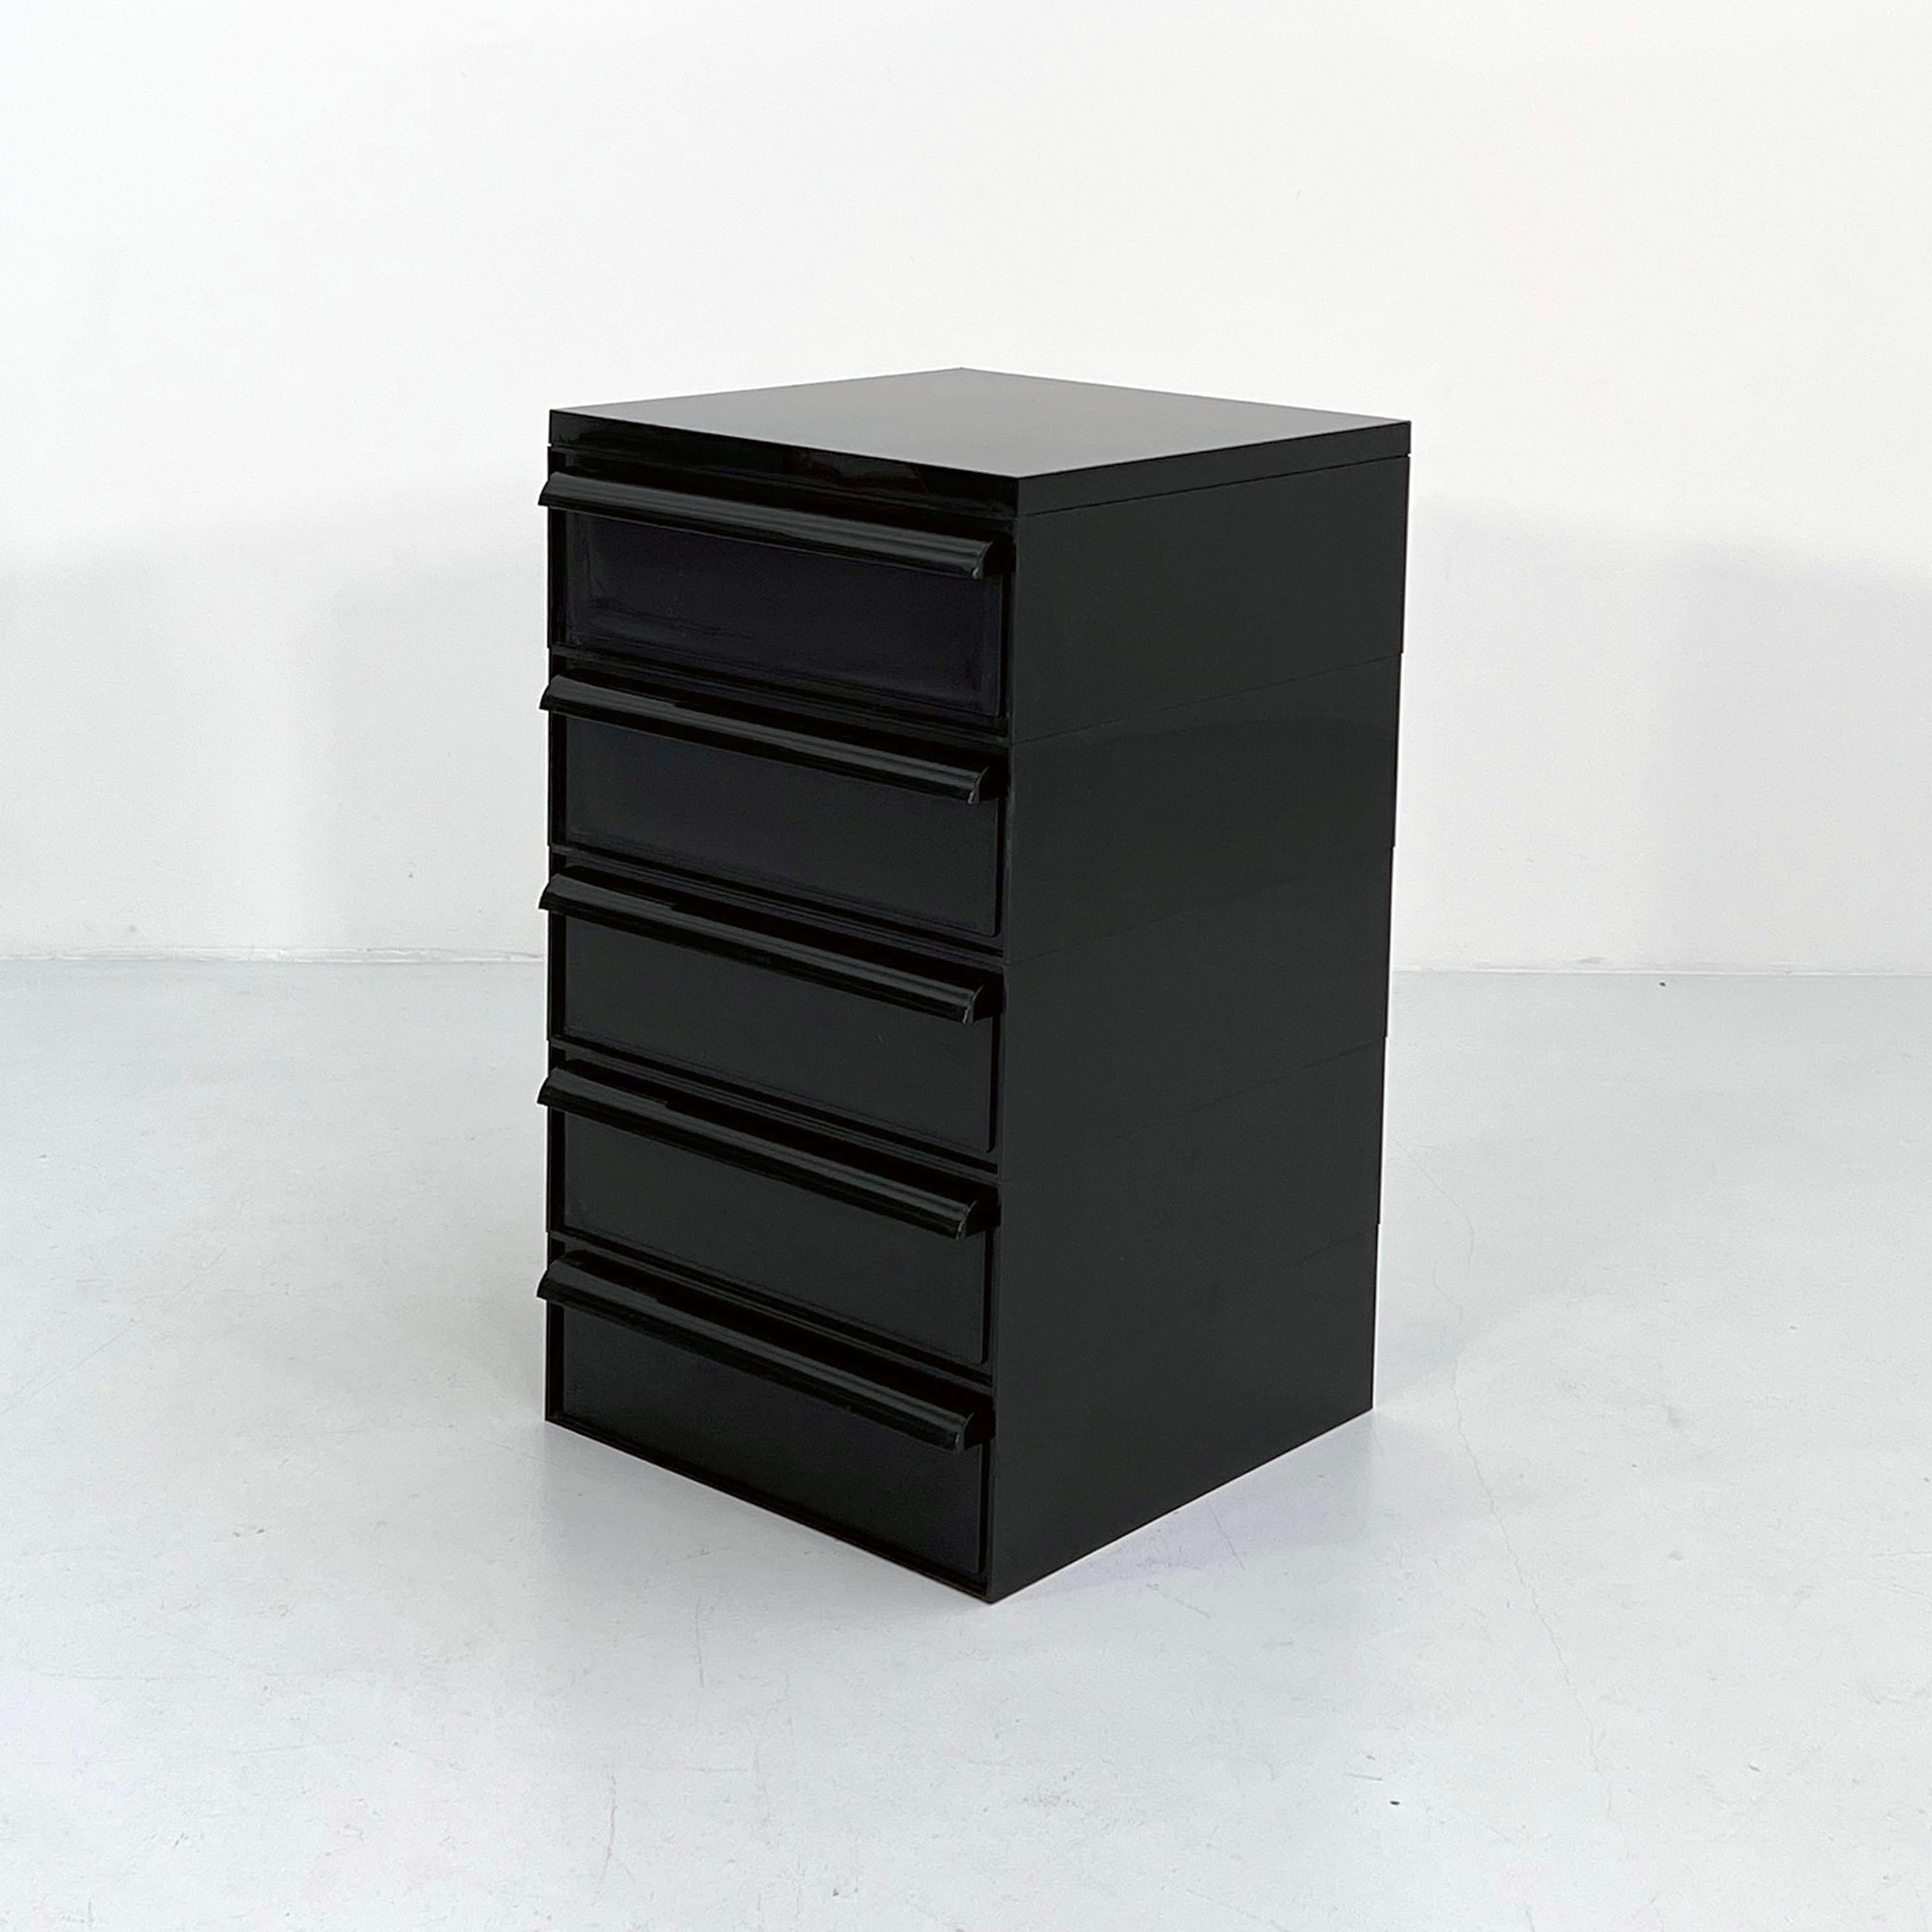 Black Chest of Drawers Model “4601” by Simon Fussell for Kartell, 1970s
Designer - Simon Fussell
Producer - Kartell
Model - Model 4601
Design Period - Seventies
Measurements - Width 42 cm x Depth 44 cm x Height 72 cm
Materials - Plastic
Color